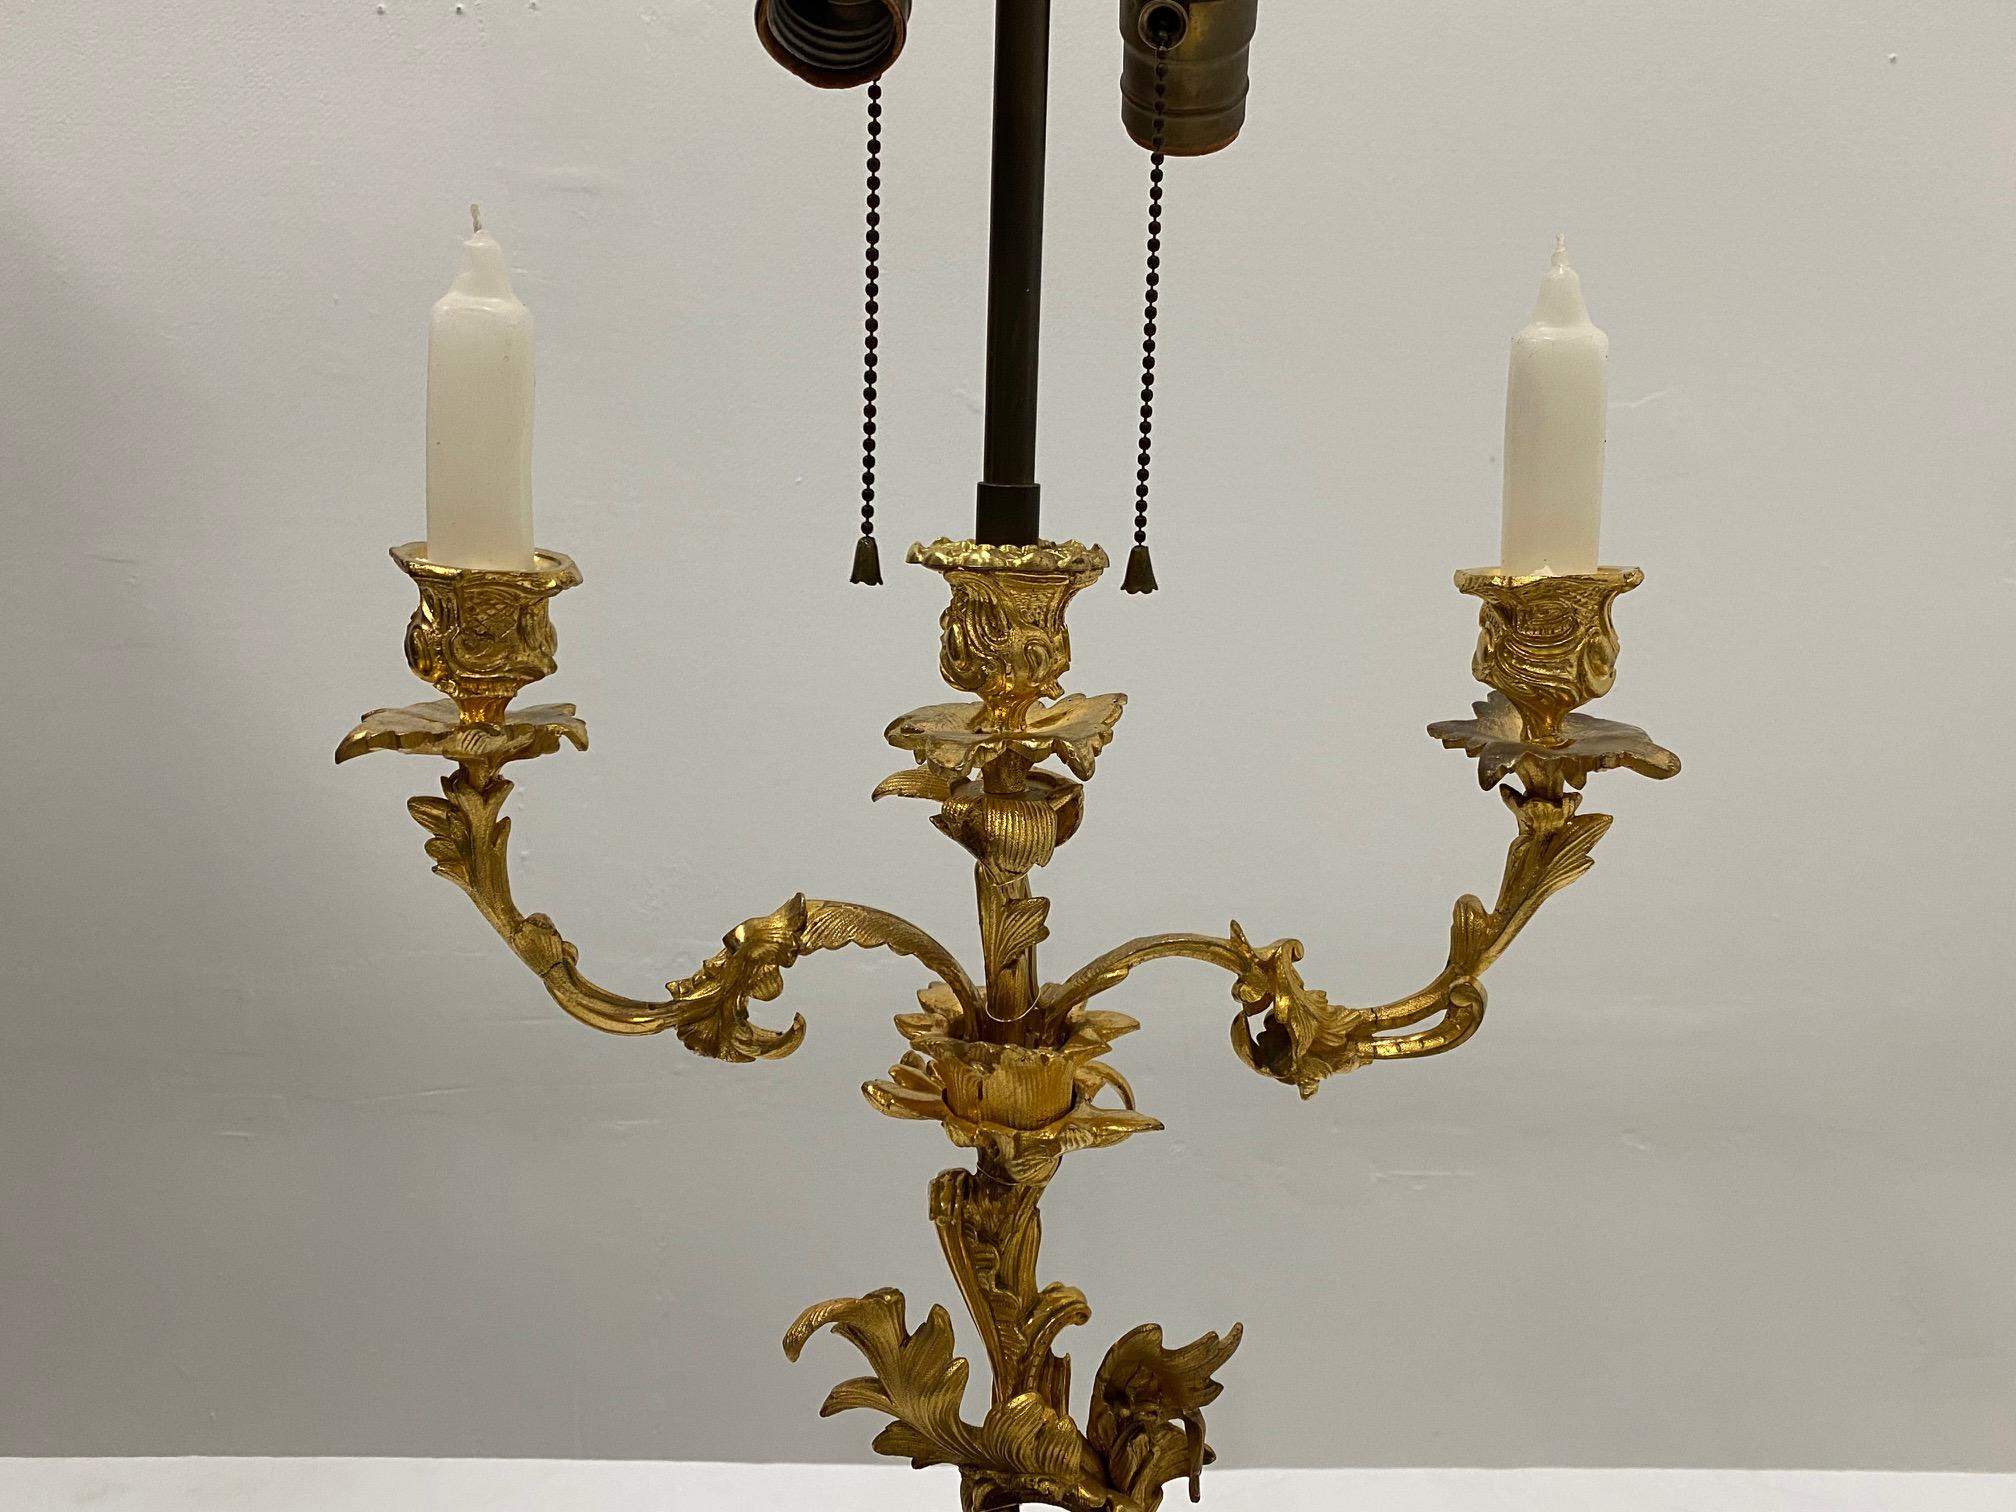 Ornate Antique French Gilt & Patinated Myth Inspired Bronze Candlestick Lamp 5